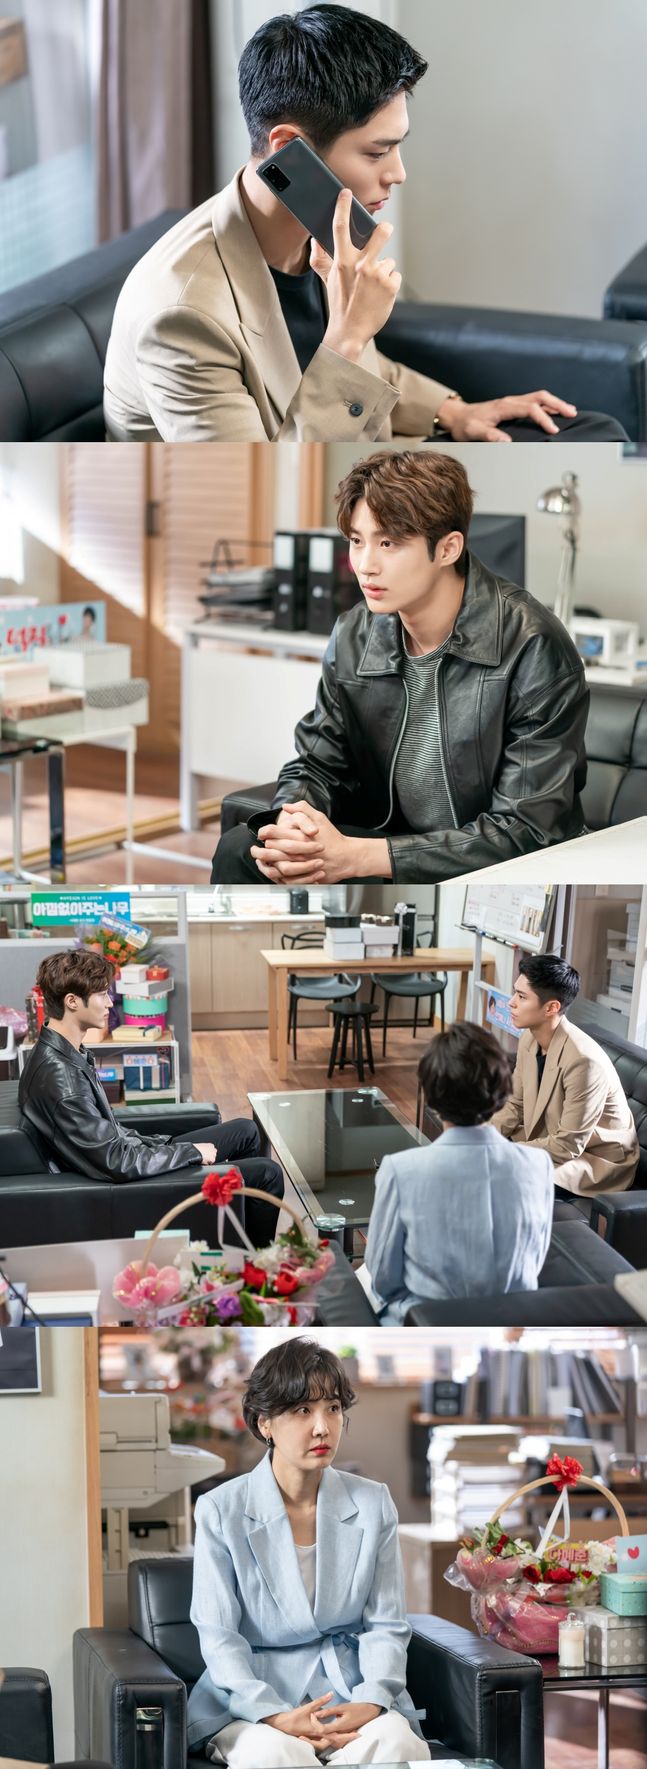 Record of Youth Park Bo-gum, Byeon Wooseok encounters.The production team of TVNs monthly drama Record of Youth (playplayed by Ha Myung-hee and directed by Ahn Gil-ho) released the images of Sangers Sa Hye-joon and Byeon Wooseok on the 12th.In the last broadcast, Sa Hye-joon won the best performance award by succeeding in the drama The Return of the King.Sa Hye-joons unstoppable move, which achieved the dream of Actor over the cold reality, gave a thrilling Qatarsis.However, when I was enjoying happiness, I heard the news of the death of Charlie Chung (Lee Seung-jun), who was caught by Sa Hye-joon.In the photo, there was a tense Champon Entertainment. Sa Hye-joons hard face, who is talking to someone, makes him guess the unusual incident that came to him.The eyes of his friend, Won Hae Hyo, who watches this, are sharp unlike usual.Sa Hye-joon and Won Hae-hyo, who cheered and supported each other, make you wonder what changes will be made in front of the crossroads of different Choices.Please pay attention to whether you can protect your dreams, love, and friendship in the Danger that shakes you.Choices of Sa Hye-joon, who does not lose his conviction, will be impressed and Qatarsis. 